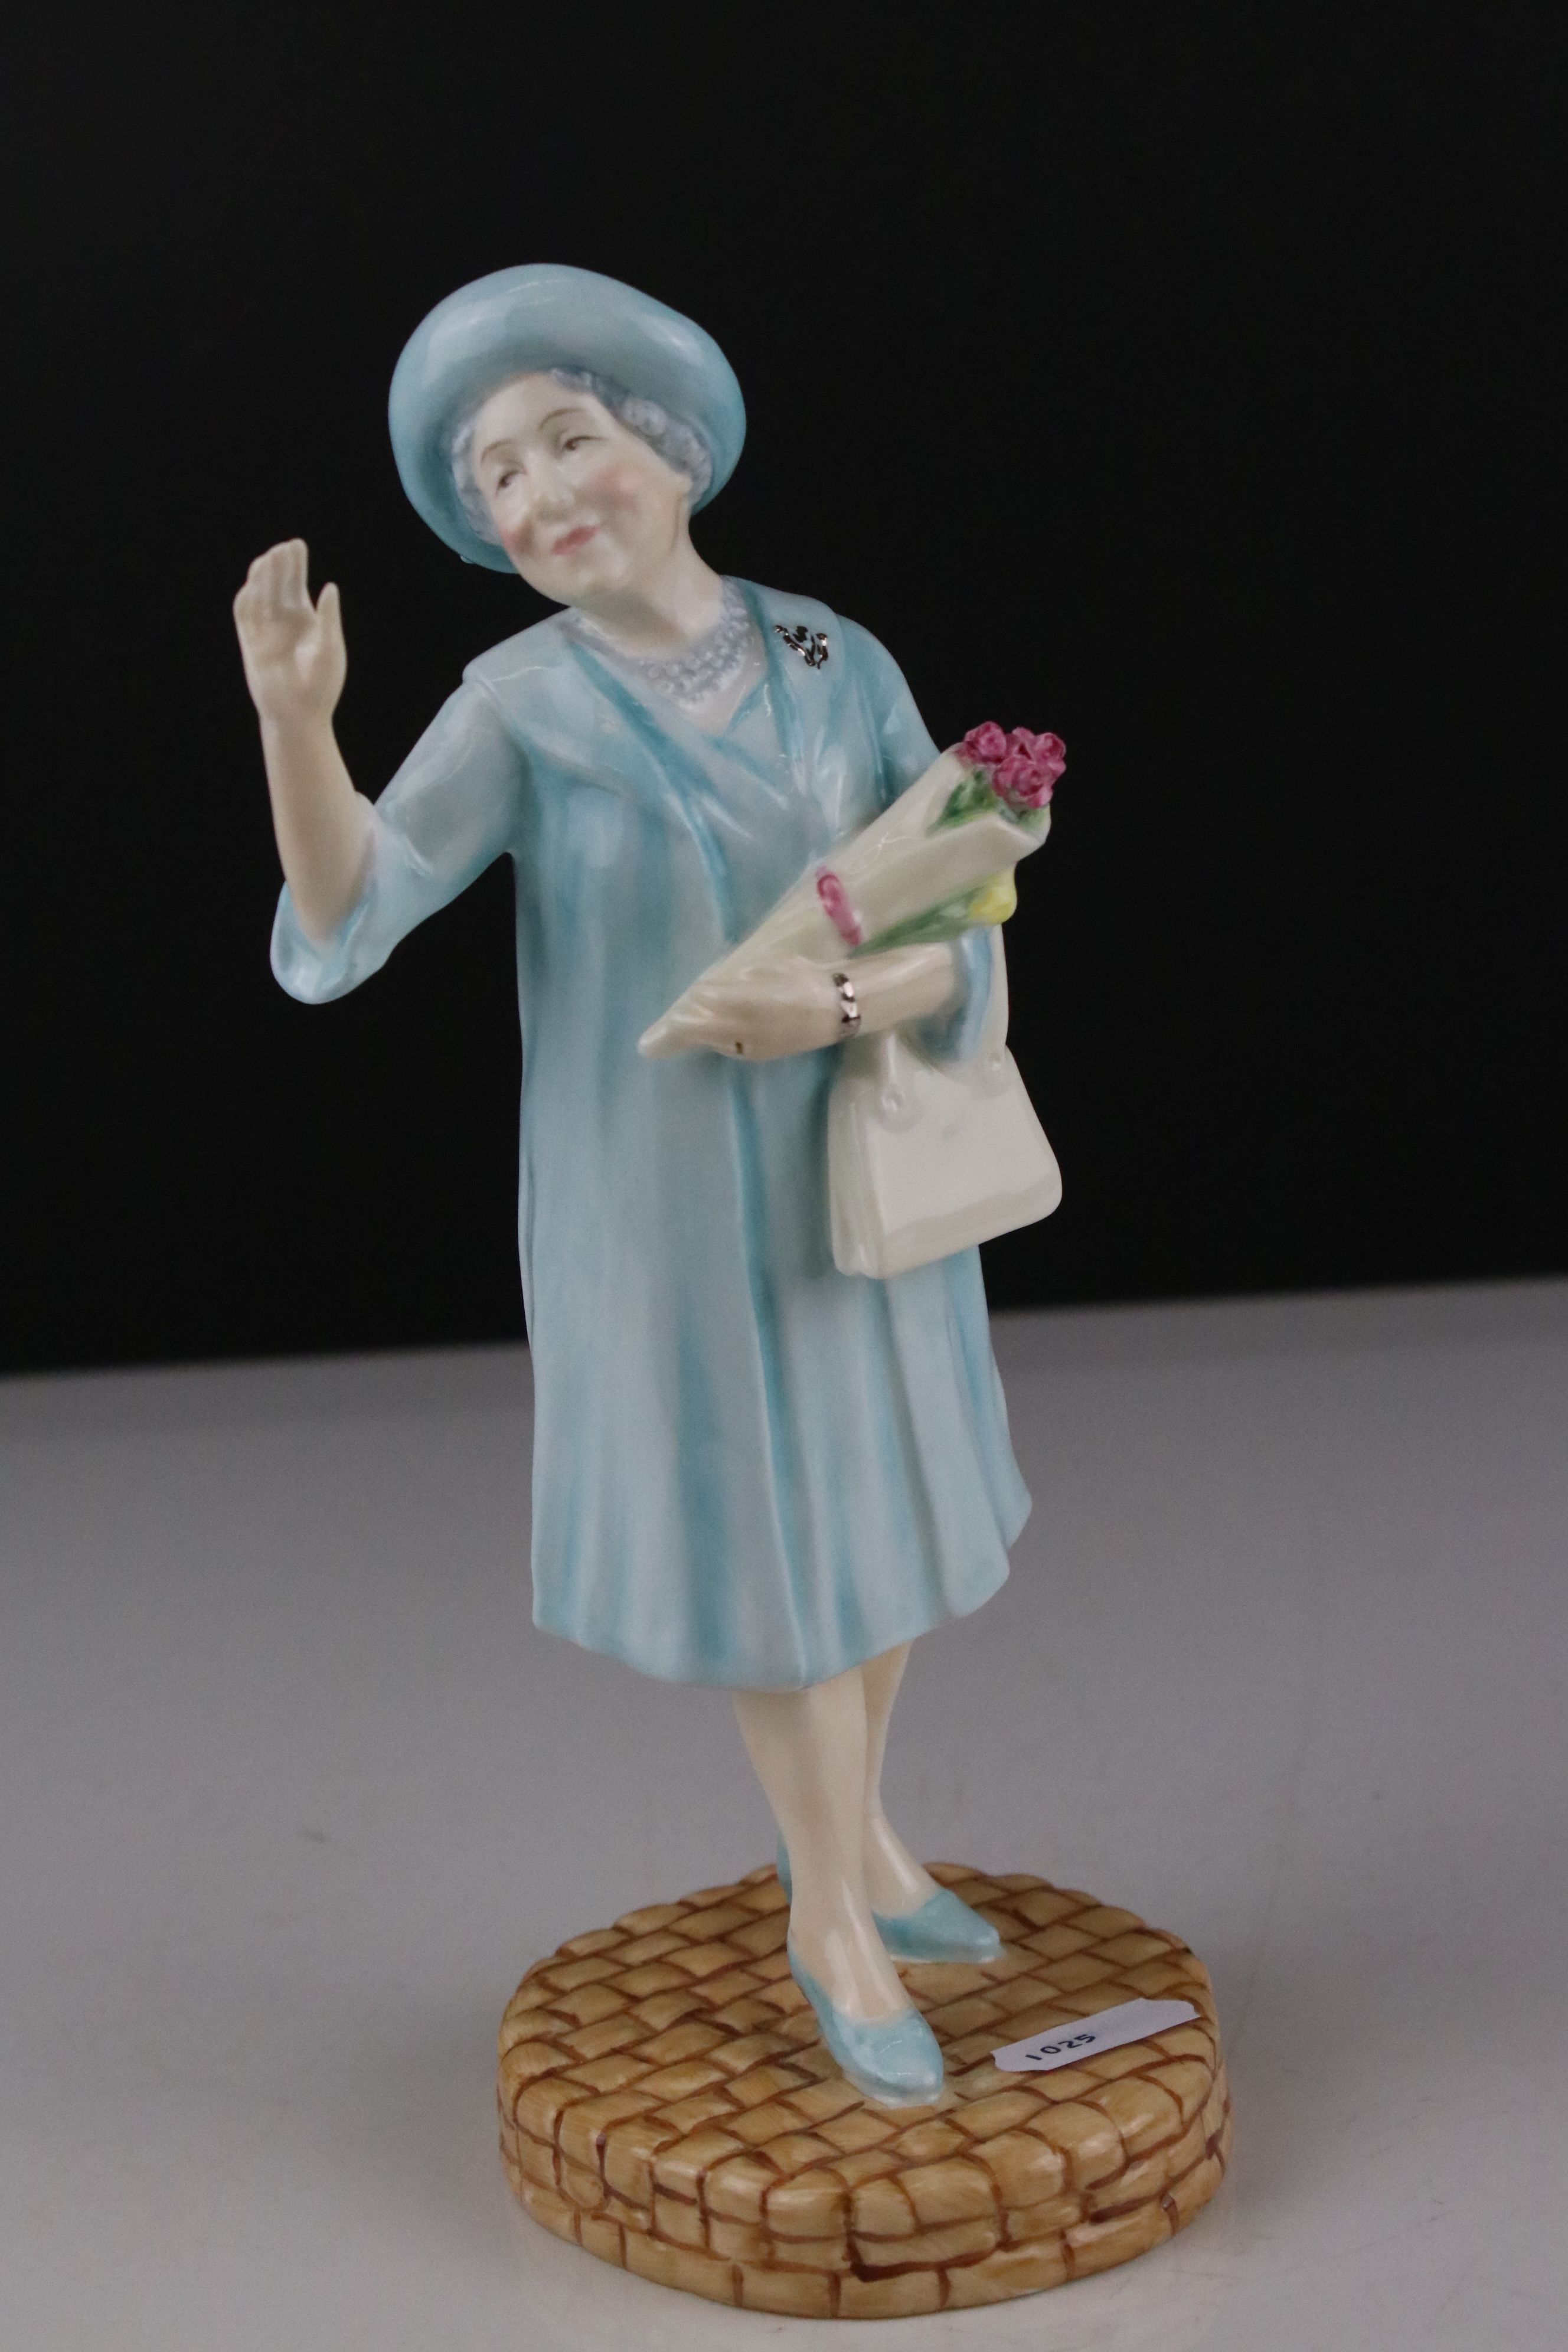 Royal Doulton ' H.M Queen Elizabeth, the Queen Mother ' Figurine, limited edition no. 1164